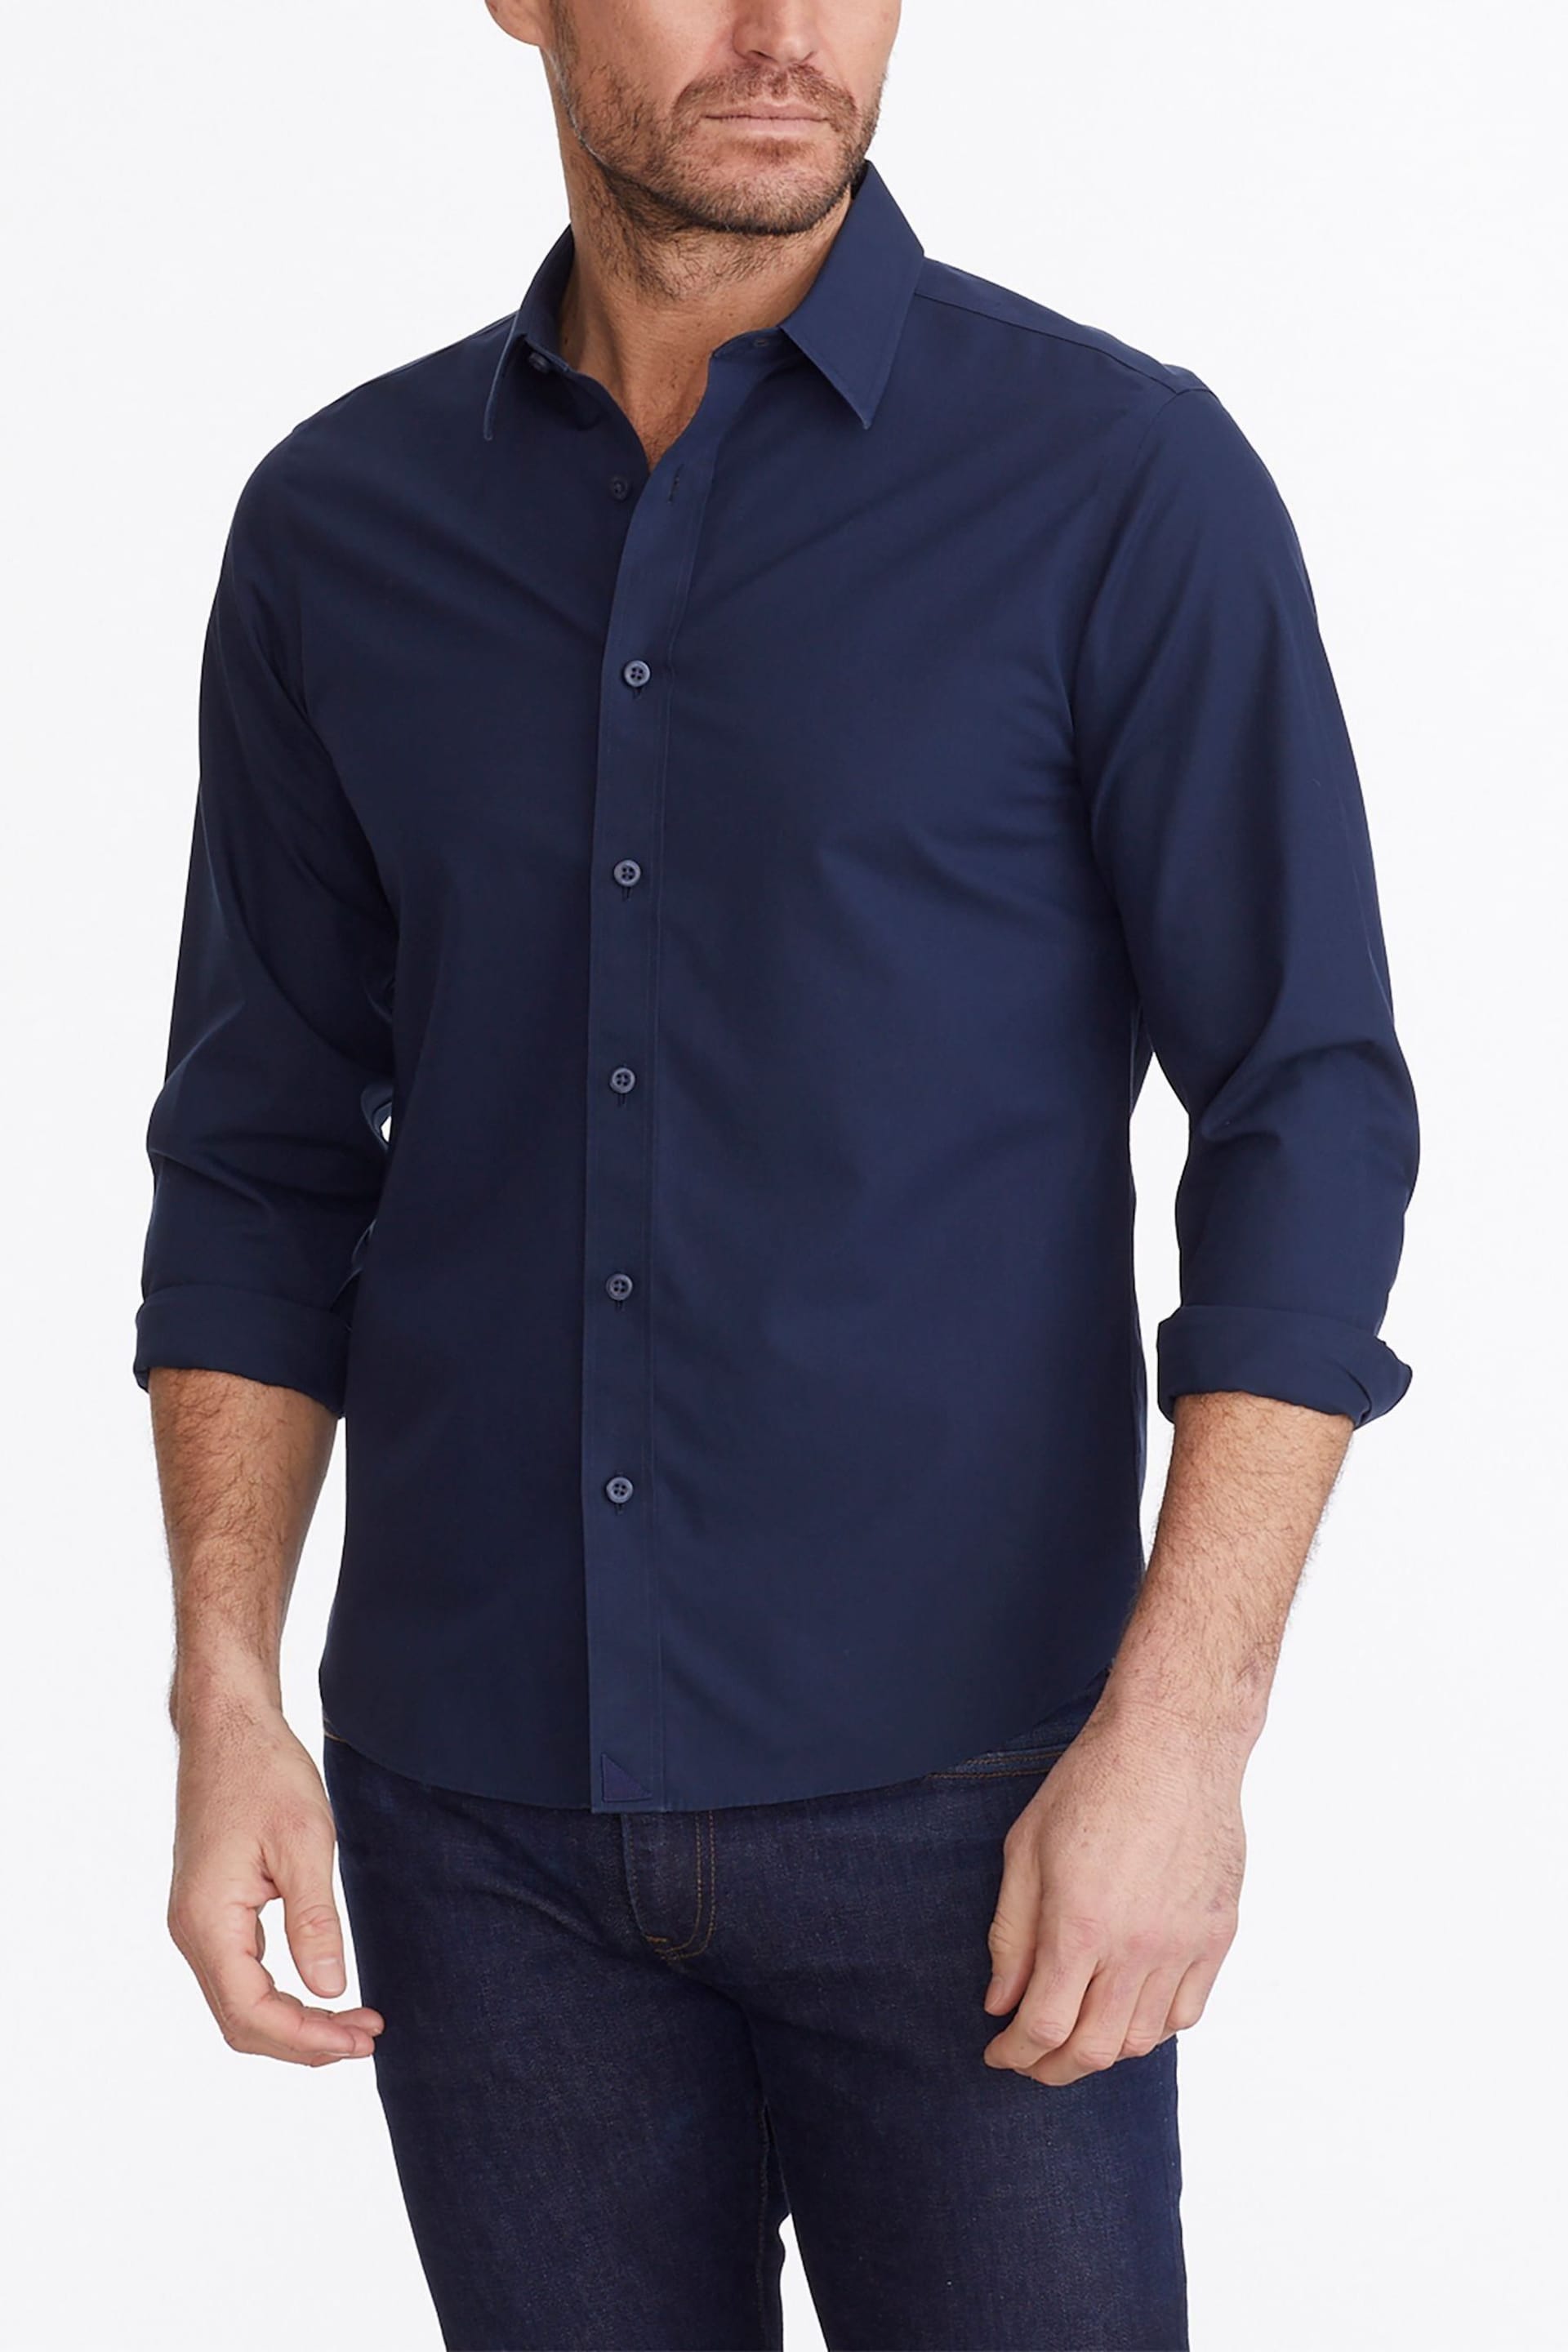 UNTUCKit Blue Dark Wrinkle-Free Relaxed Fit Castello Shirt - Image 1 of 6